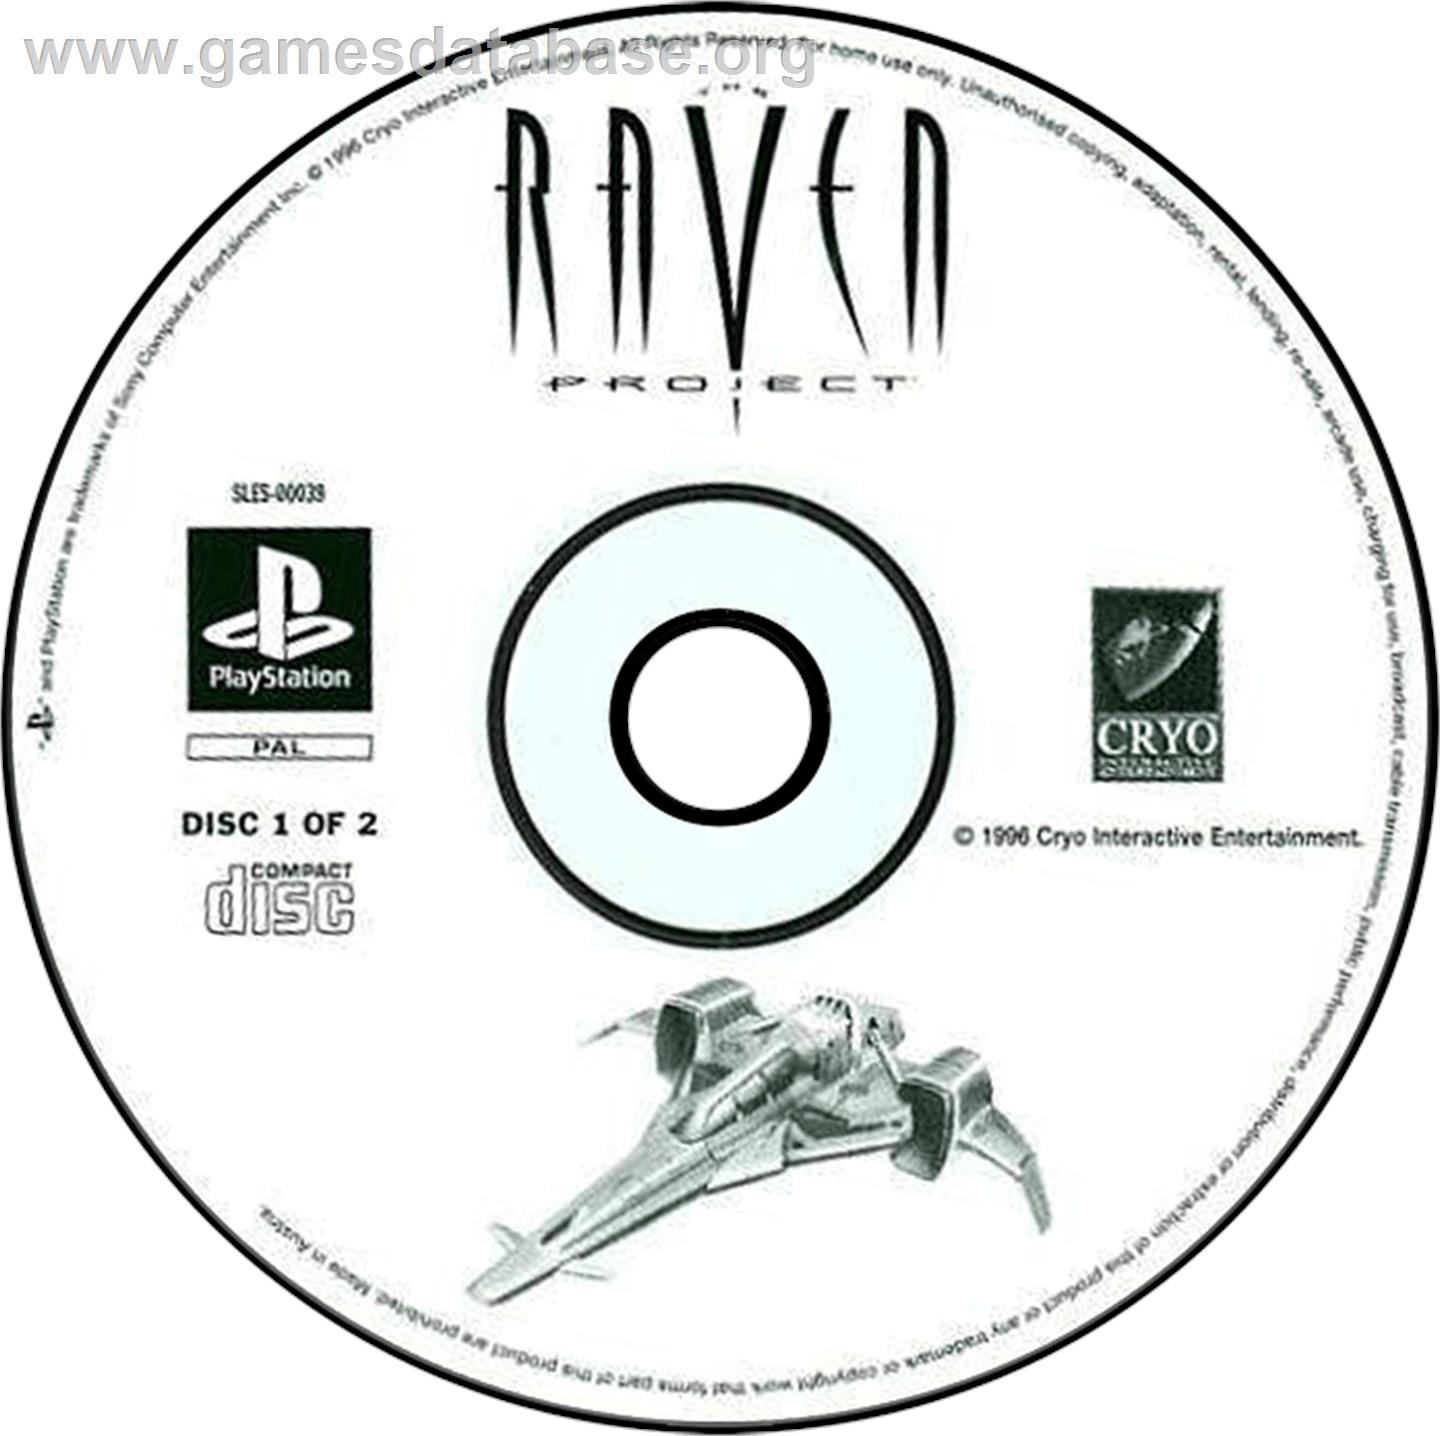 The Raven Project - Sony Playstation - Artwork - Disc